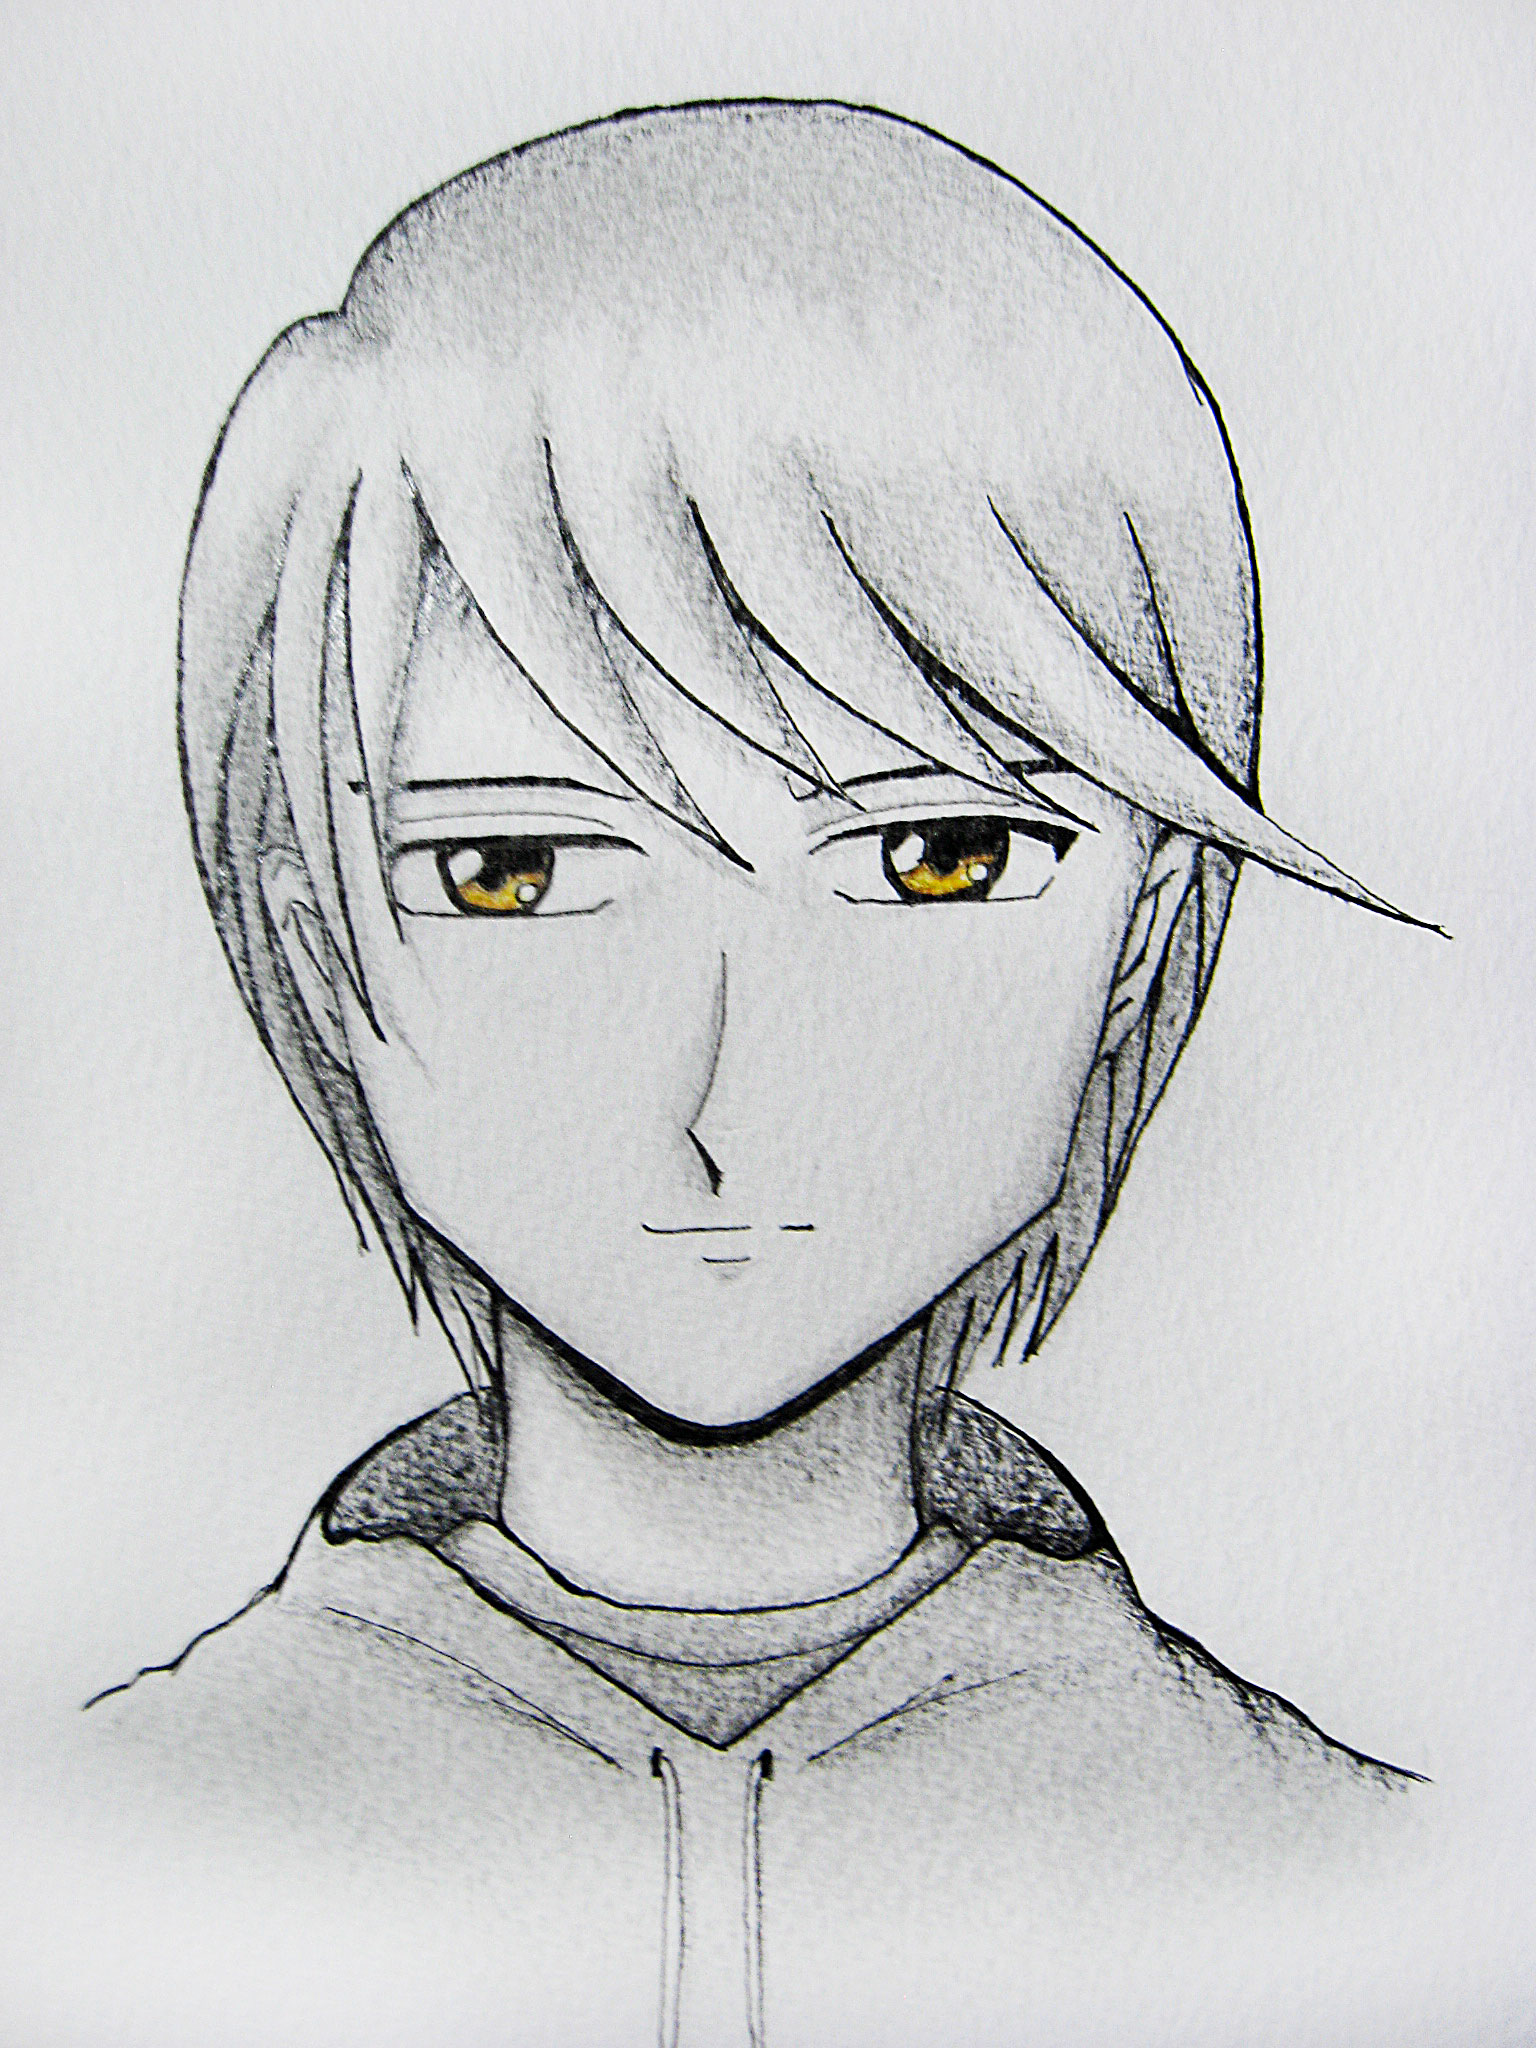 this is a drawing of a man with eyes, ears and an anime haircut